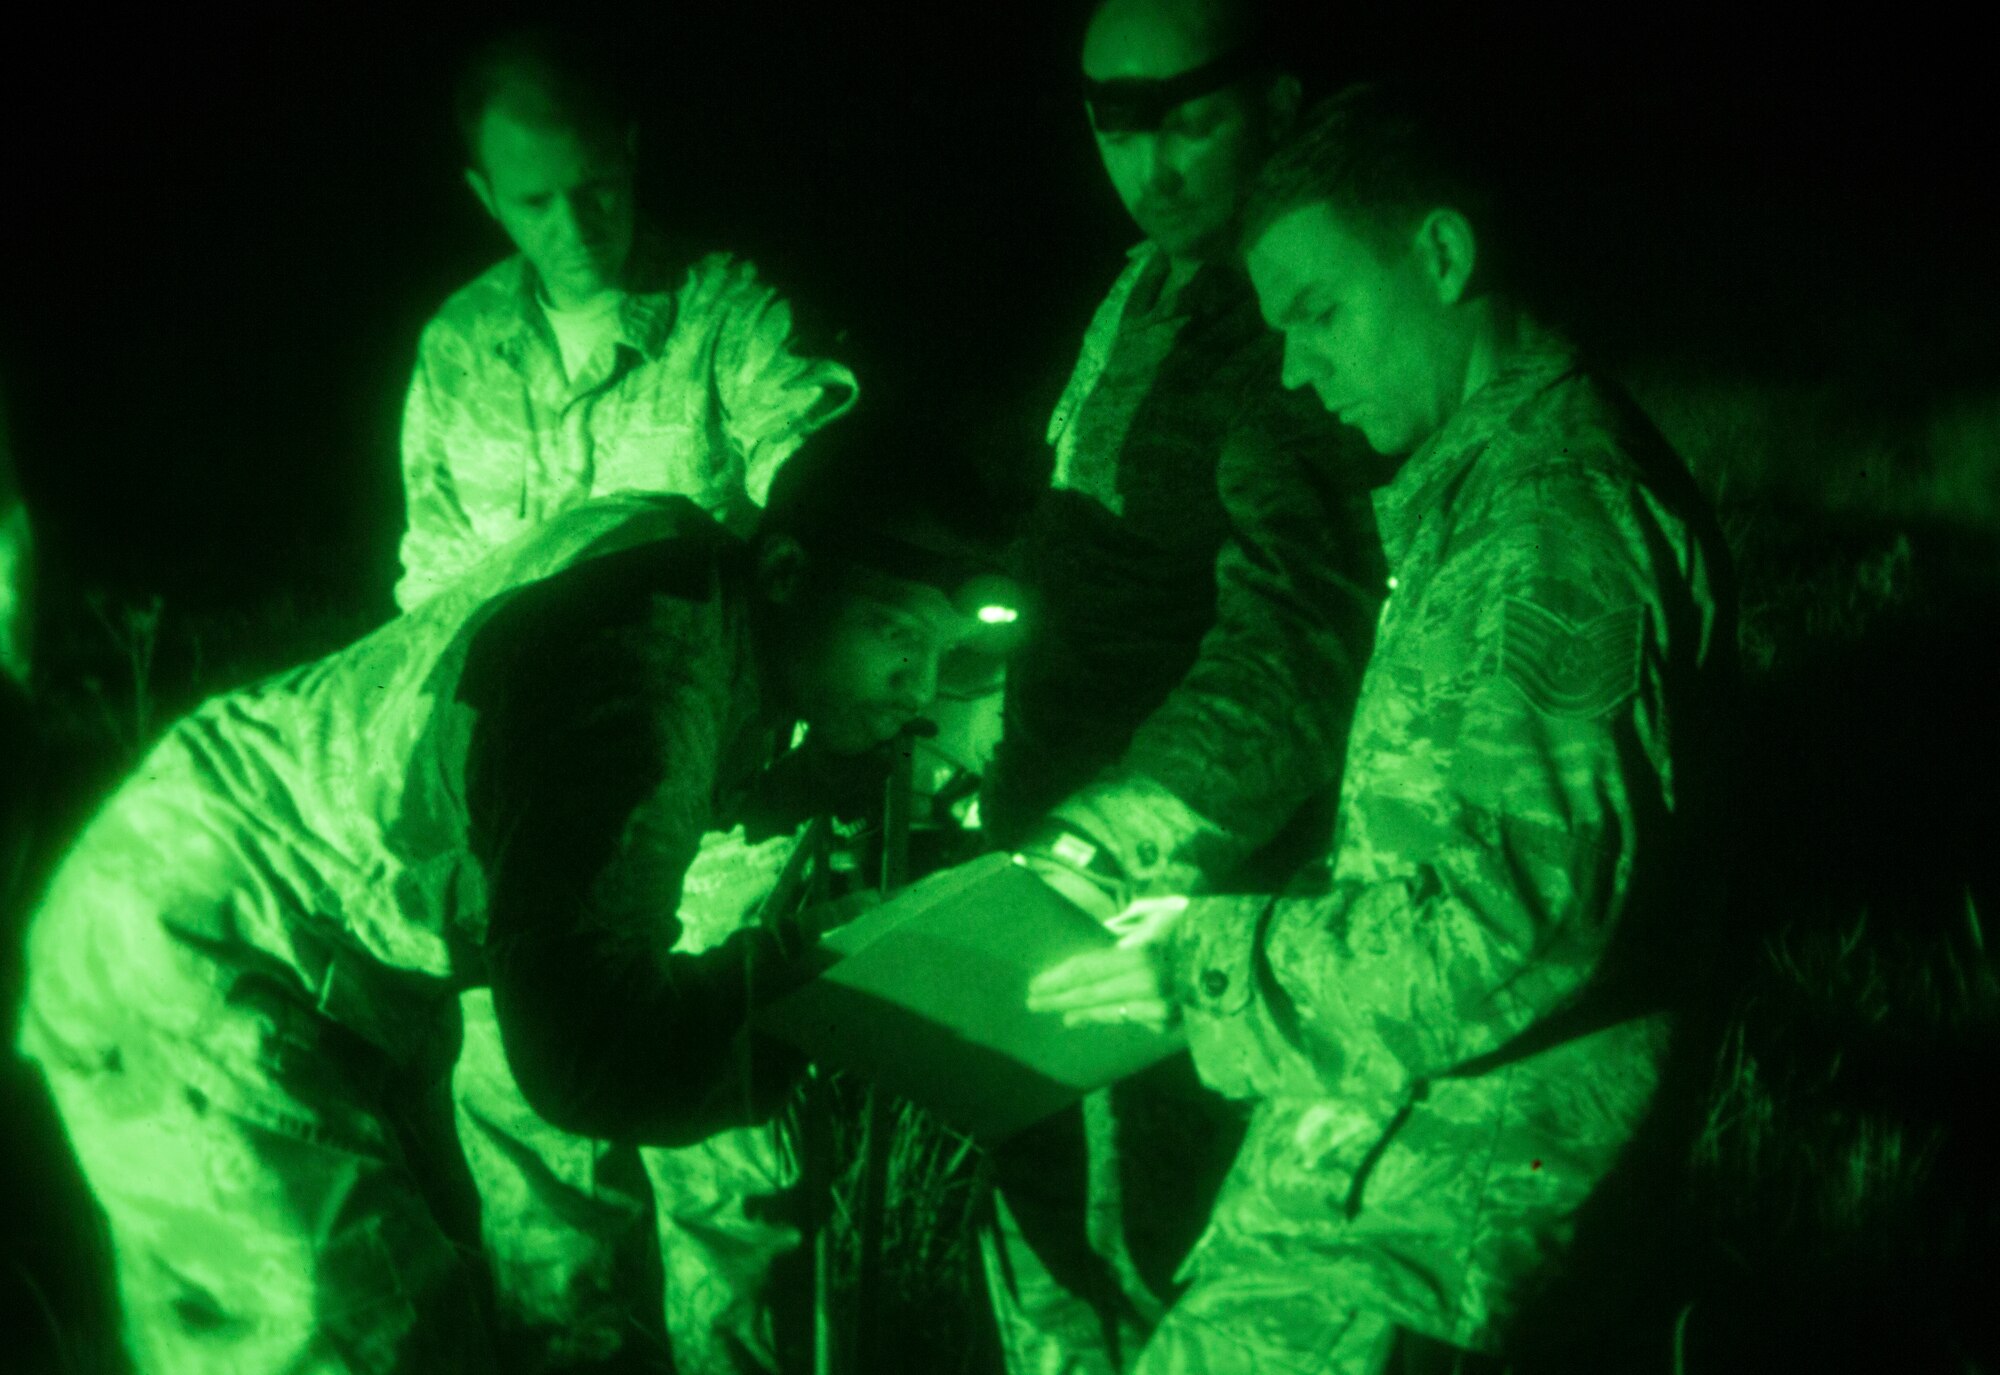 U.S. Air Force engineers with the 36th Contingency Response Group, Joint Task Force-505 write down measurements used to determine the geotechnical engineering properties of the soil at the Tribhuvan International Airport, Kathmandu, Nepal, May 8, 2015. The team tested the soil using a dynamic cone penetrometer to determine its stability following the 7.8 magnitude earthquake.  The pavement evaluation tested to see if there were any significant changes to the soil beneath the runway since the earthquake. Any changes could restrict weight limitations to incoming flights in order to prevent any runway damage. The Nepalese government requested the U.S. Government assistance after a 7.8 magnitude earthquake struck the country April 25, 2015.  JTF-505 works in conjunction with U.S. Agency for International Development and the international community to provide unique capabilities to assist Nepal. (U.S. Marine Corps photo by MCIPAC Combat Camera Staff Sgt. Jeffrey D. Anderson/Released)